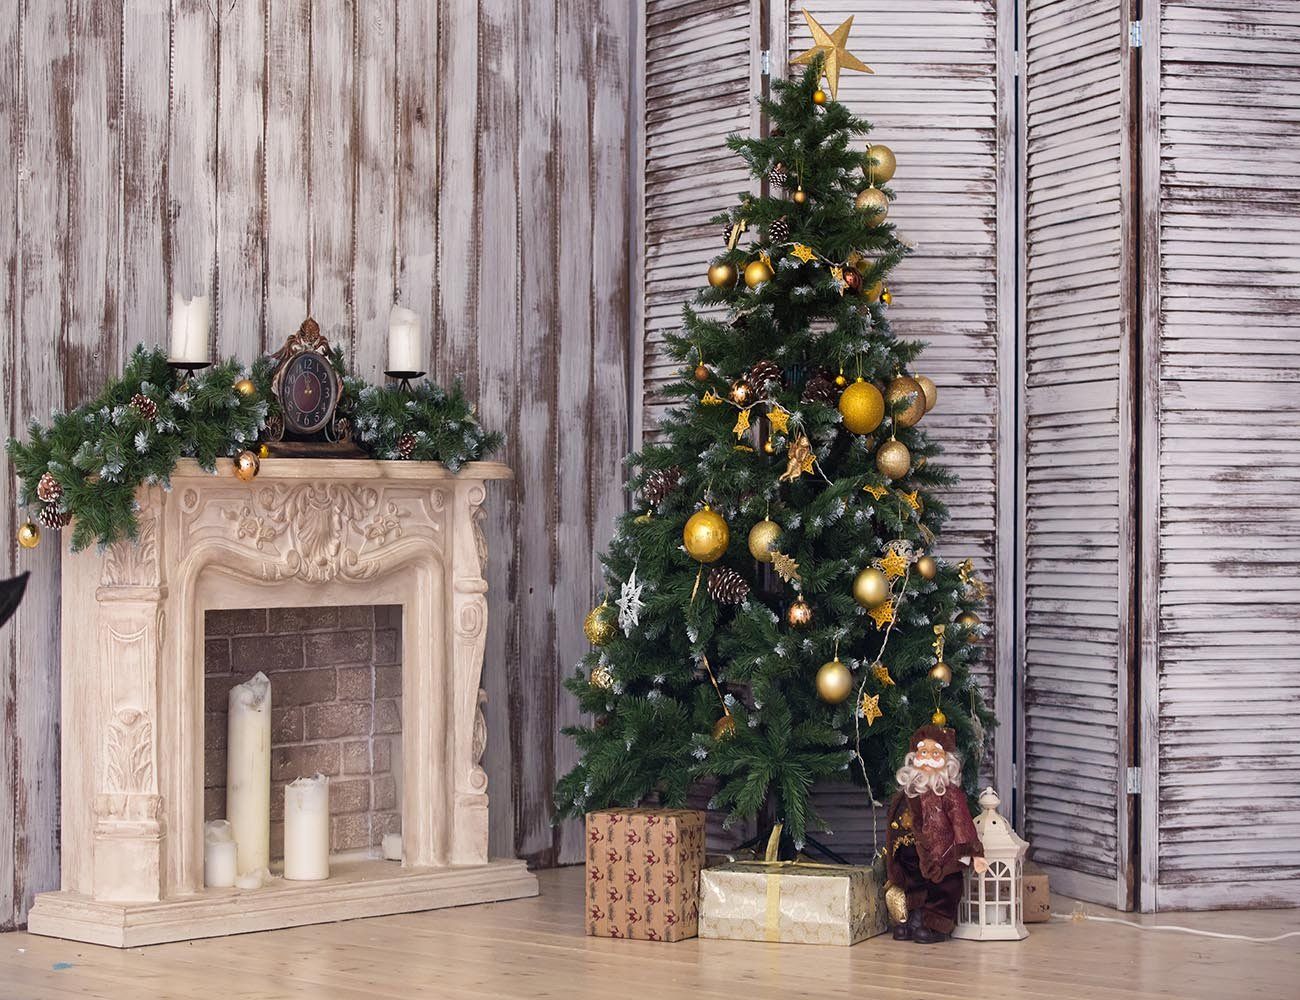 Cozy Room With New Year Tree And Fireplace Photography Backdrop J-0656 Shopbackdrop